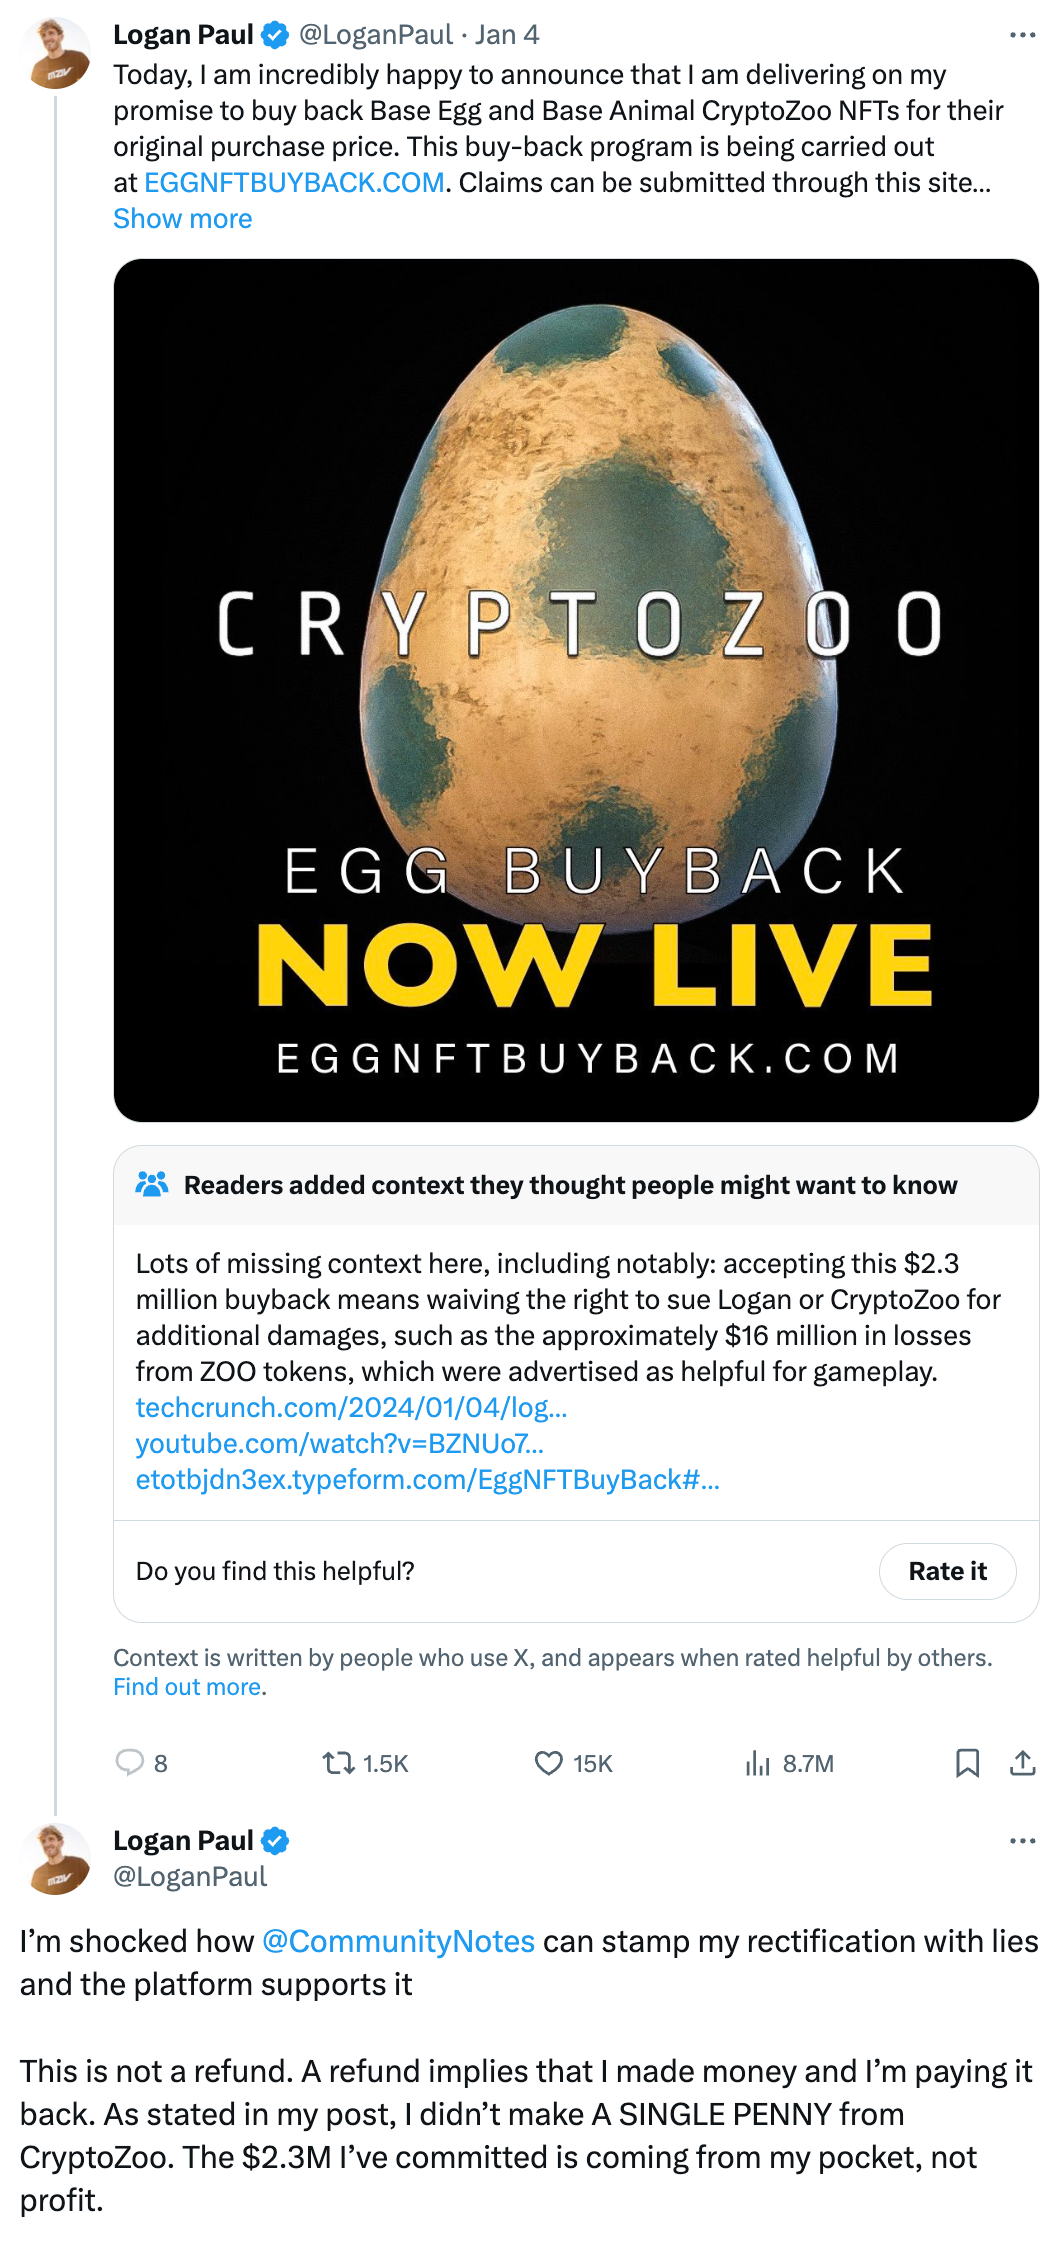 Logan Paul @LoganPaul Jan 4 Today, I am incredibly happy to announce that I am delivering on my promise to buy back Base Egg and Base Animal CryptoZoo NFTs for their original purchase price. This buy-back program is being carried out at http://EGGNFTBUYBACK.COM. Claims can be submitted through this site… Readers added context they thought people might want to know Lots of missing context here, including notably: accepting this $2.3 million buyback means waiving the right to sue Logan or CryptoZoo for additional damages, such as the approximately $16 million in losses from ZOO tokens, which were advertised as helpful for gameplay.  Logan Paul @LoganPaul I’m shocked how @CommunityNotes can stamp my rectification with lies and the platform supports it  This is not a refund. A refund implies that I made money and I’m paying it back. As stated in my post, I didn’t make A SINGLE PENNY from CryptoZoo. The $2.3M I’ve committed is coming from my pocket, not profit.